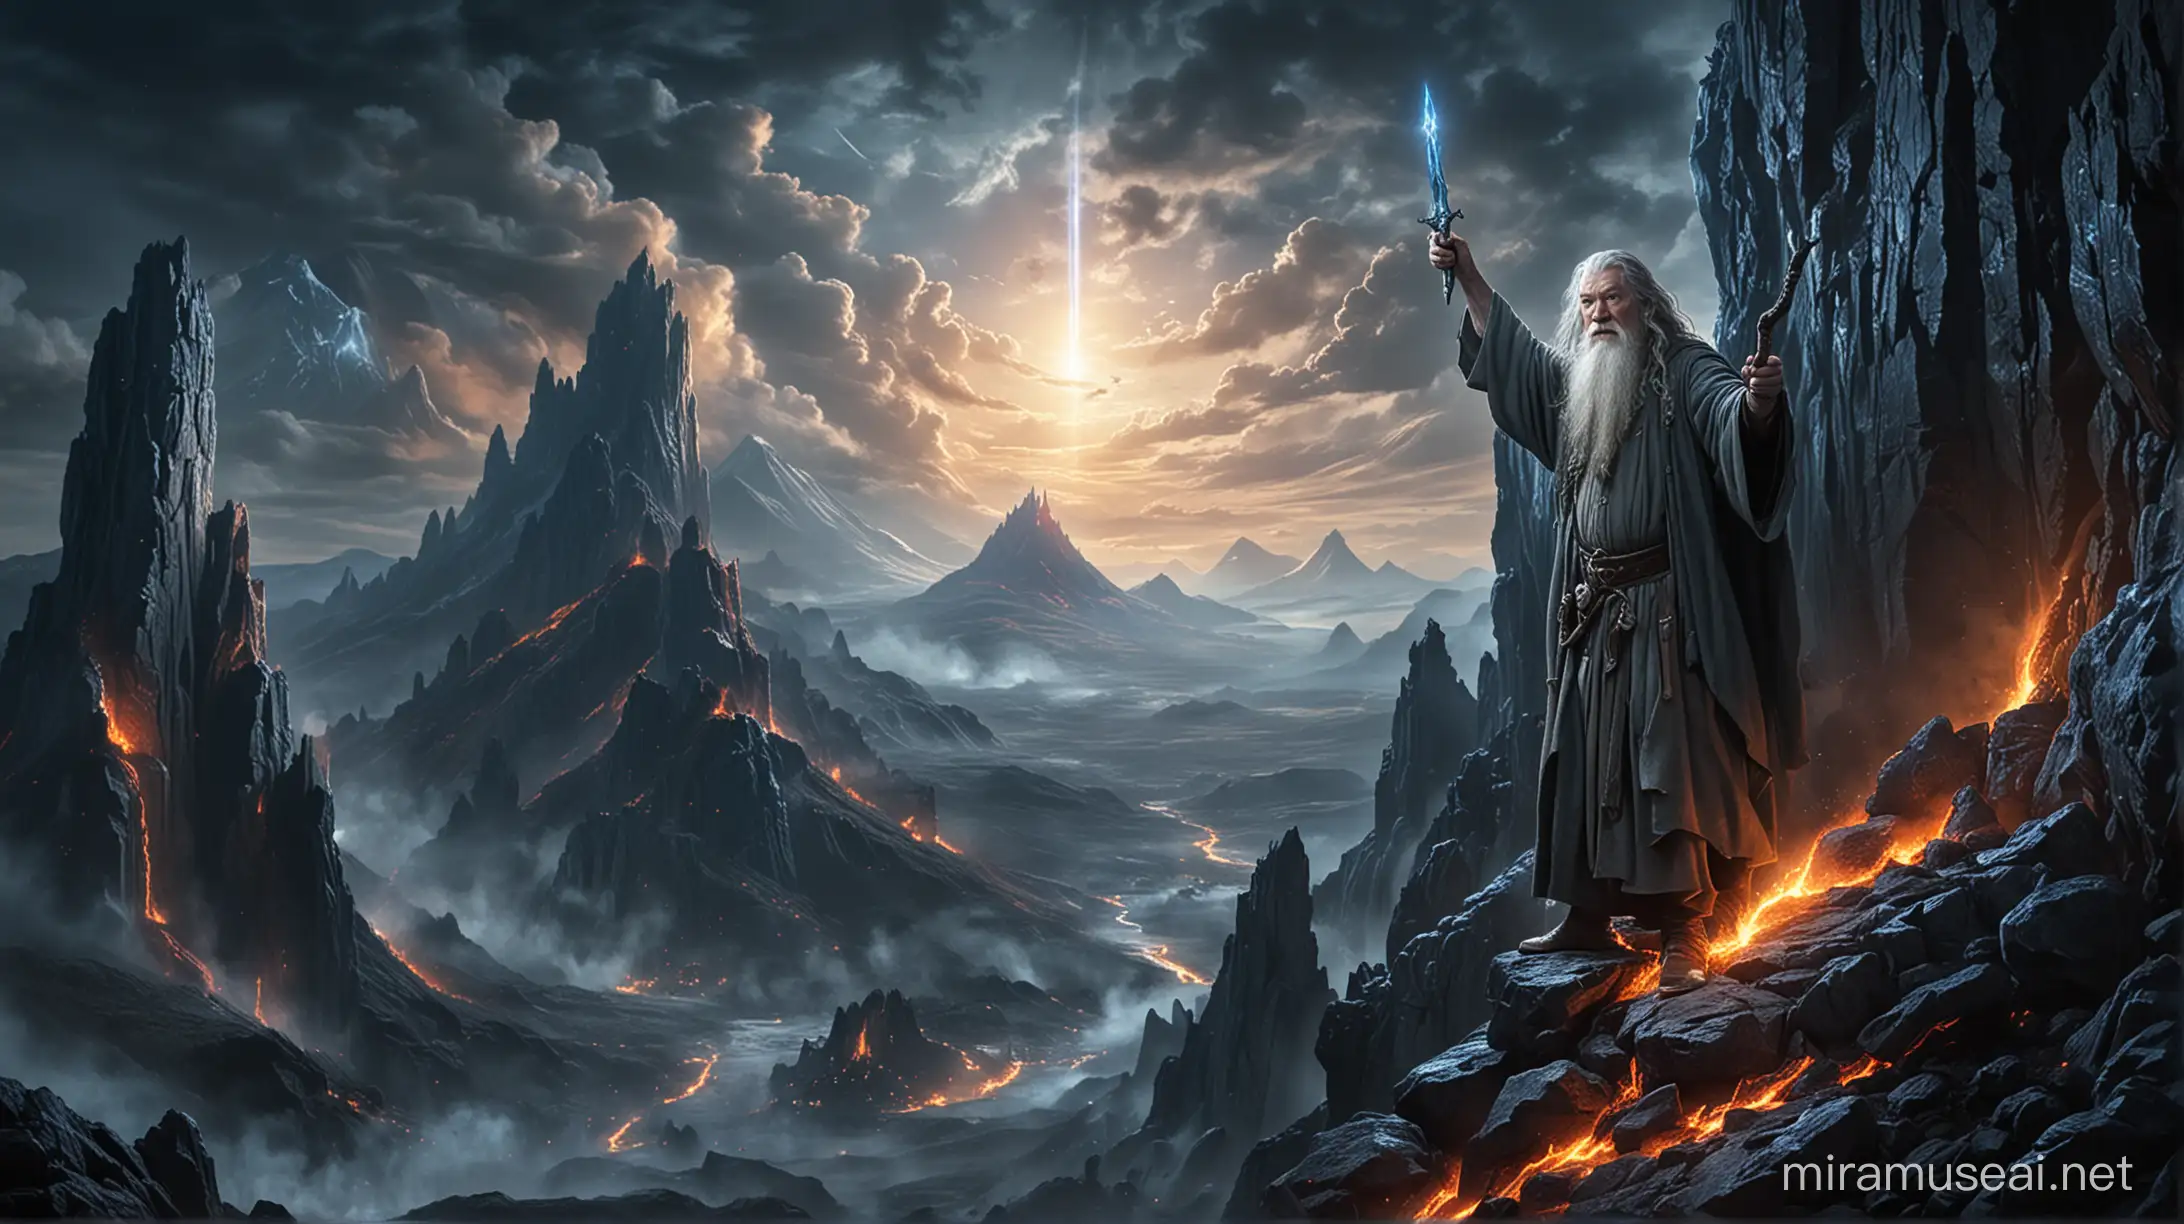 Gandalf the Gray at the edge of a rock cliff doing his eternal pose with arms to the air, holding his staff on the right hand and his elvish dagger on the left hand. Is seen a glowing blue light coming from his staff gem bringing light to a mysterious dark night . Is seen a lot of orcs crawling up the cliff holding torches while the volcano is erupting lava down the mountain in the background.